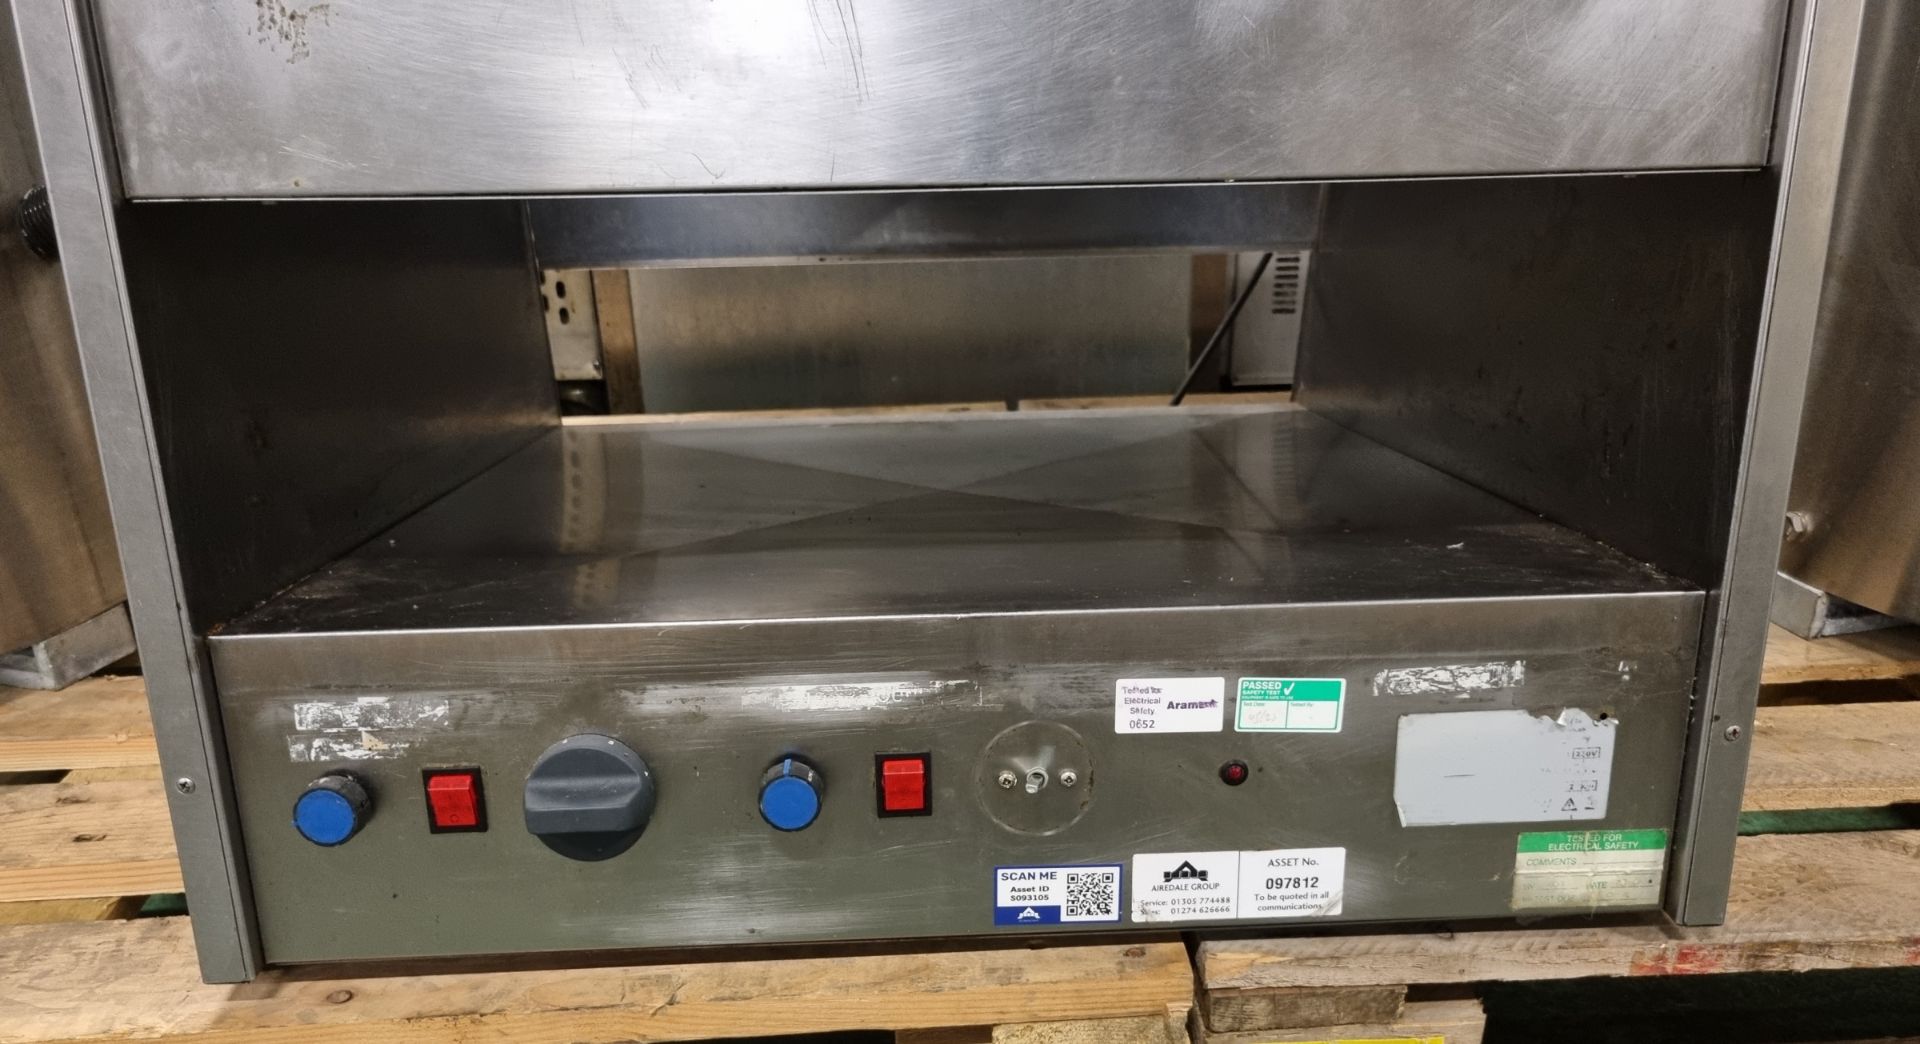 Stainless steel 2 tier heated food chute - W 700 x D 770 x H 780mm - Image 3 of 6